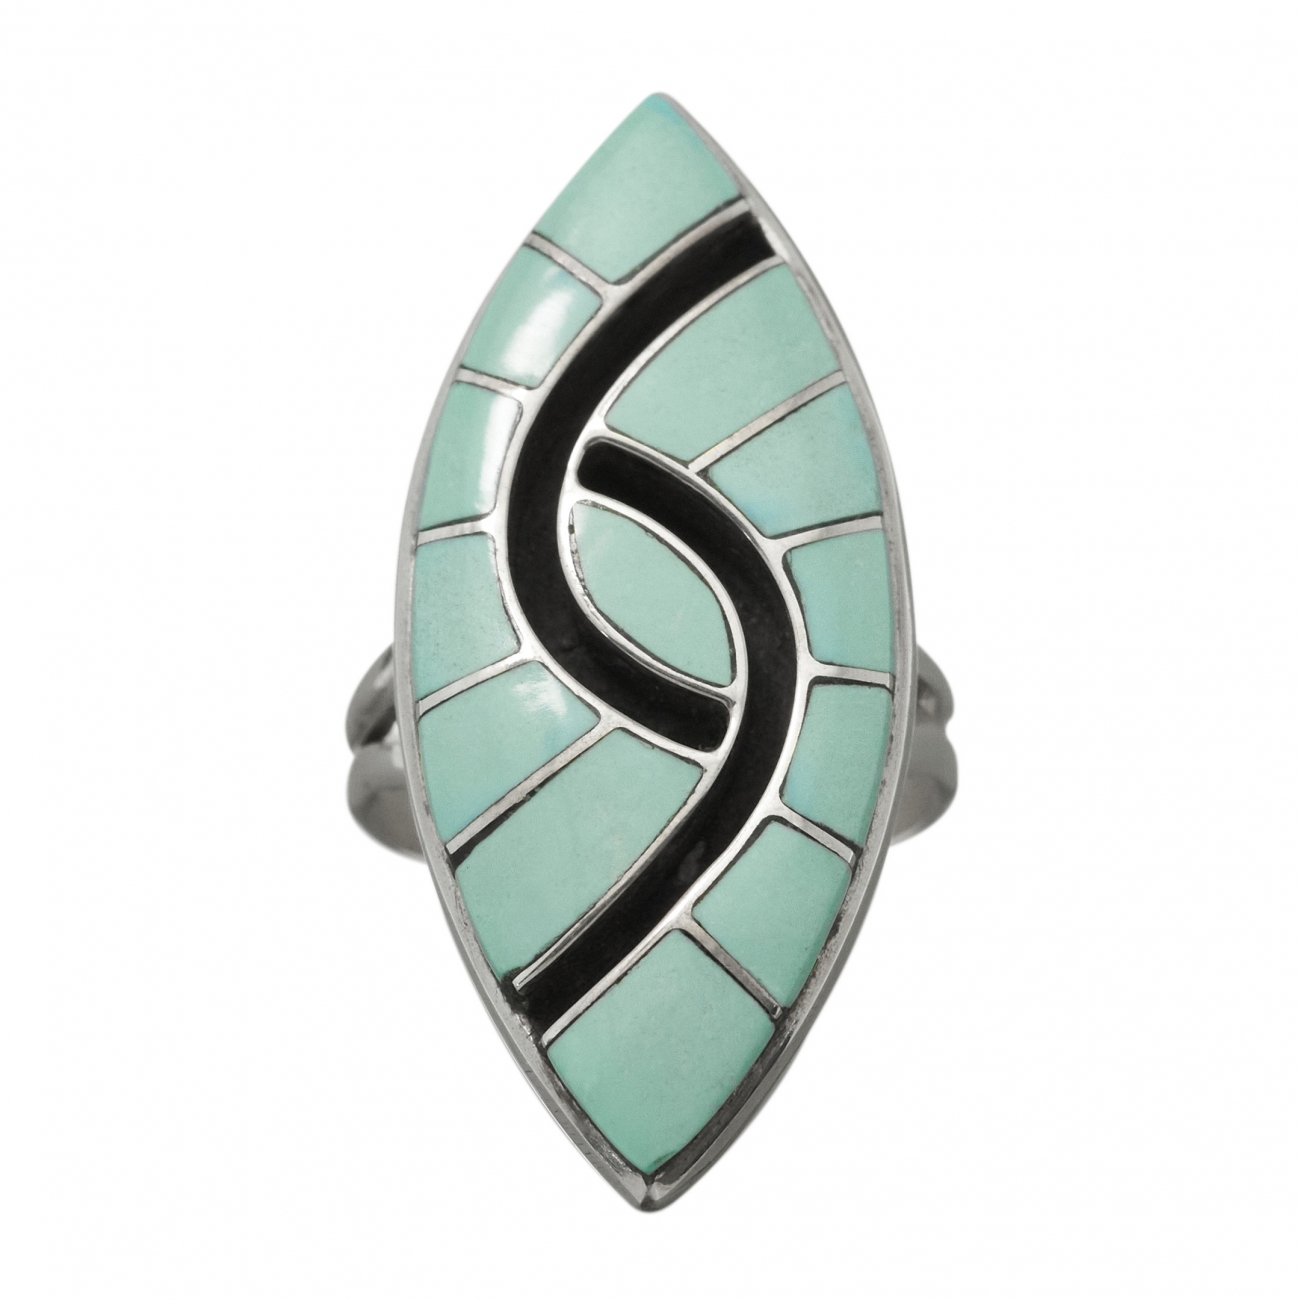 Zuni ring BA980 in turquoise and silver - Harpo Paris